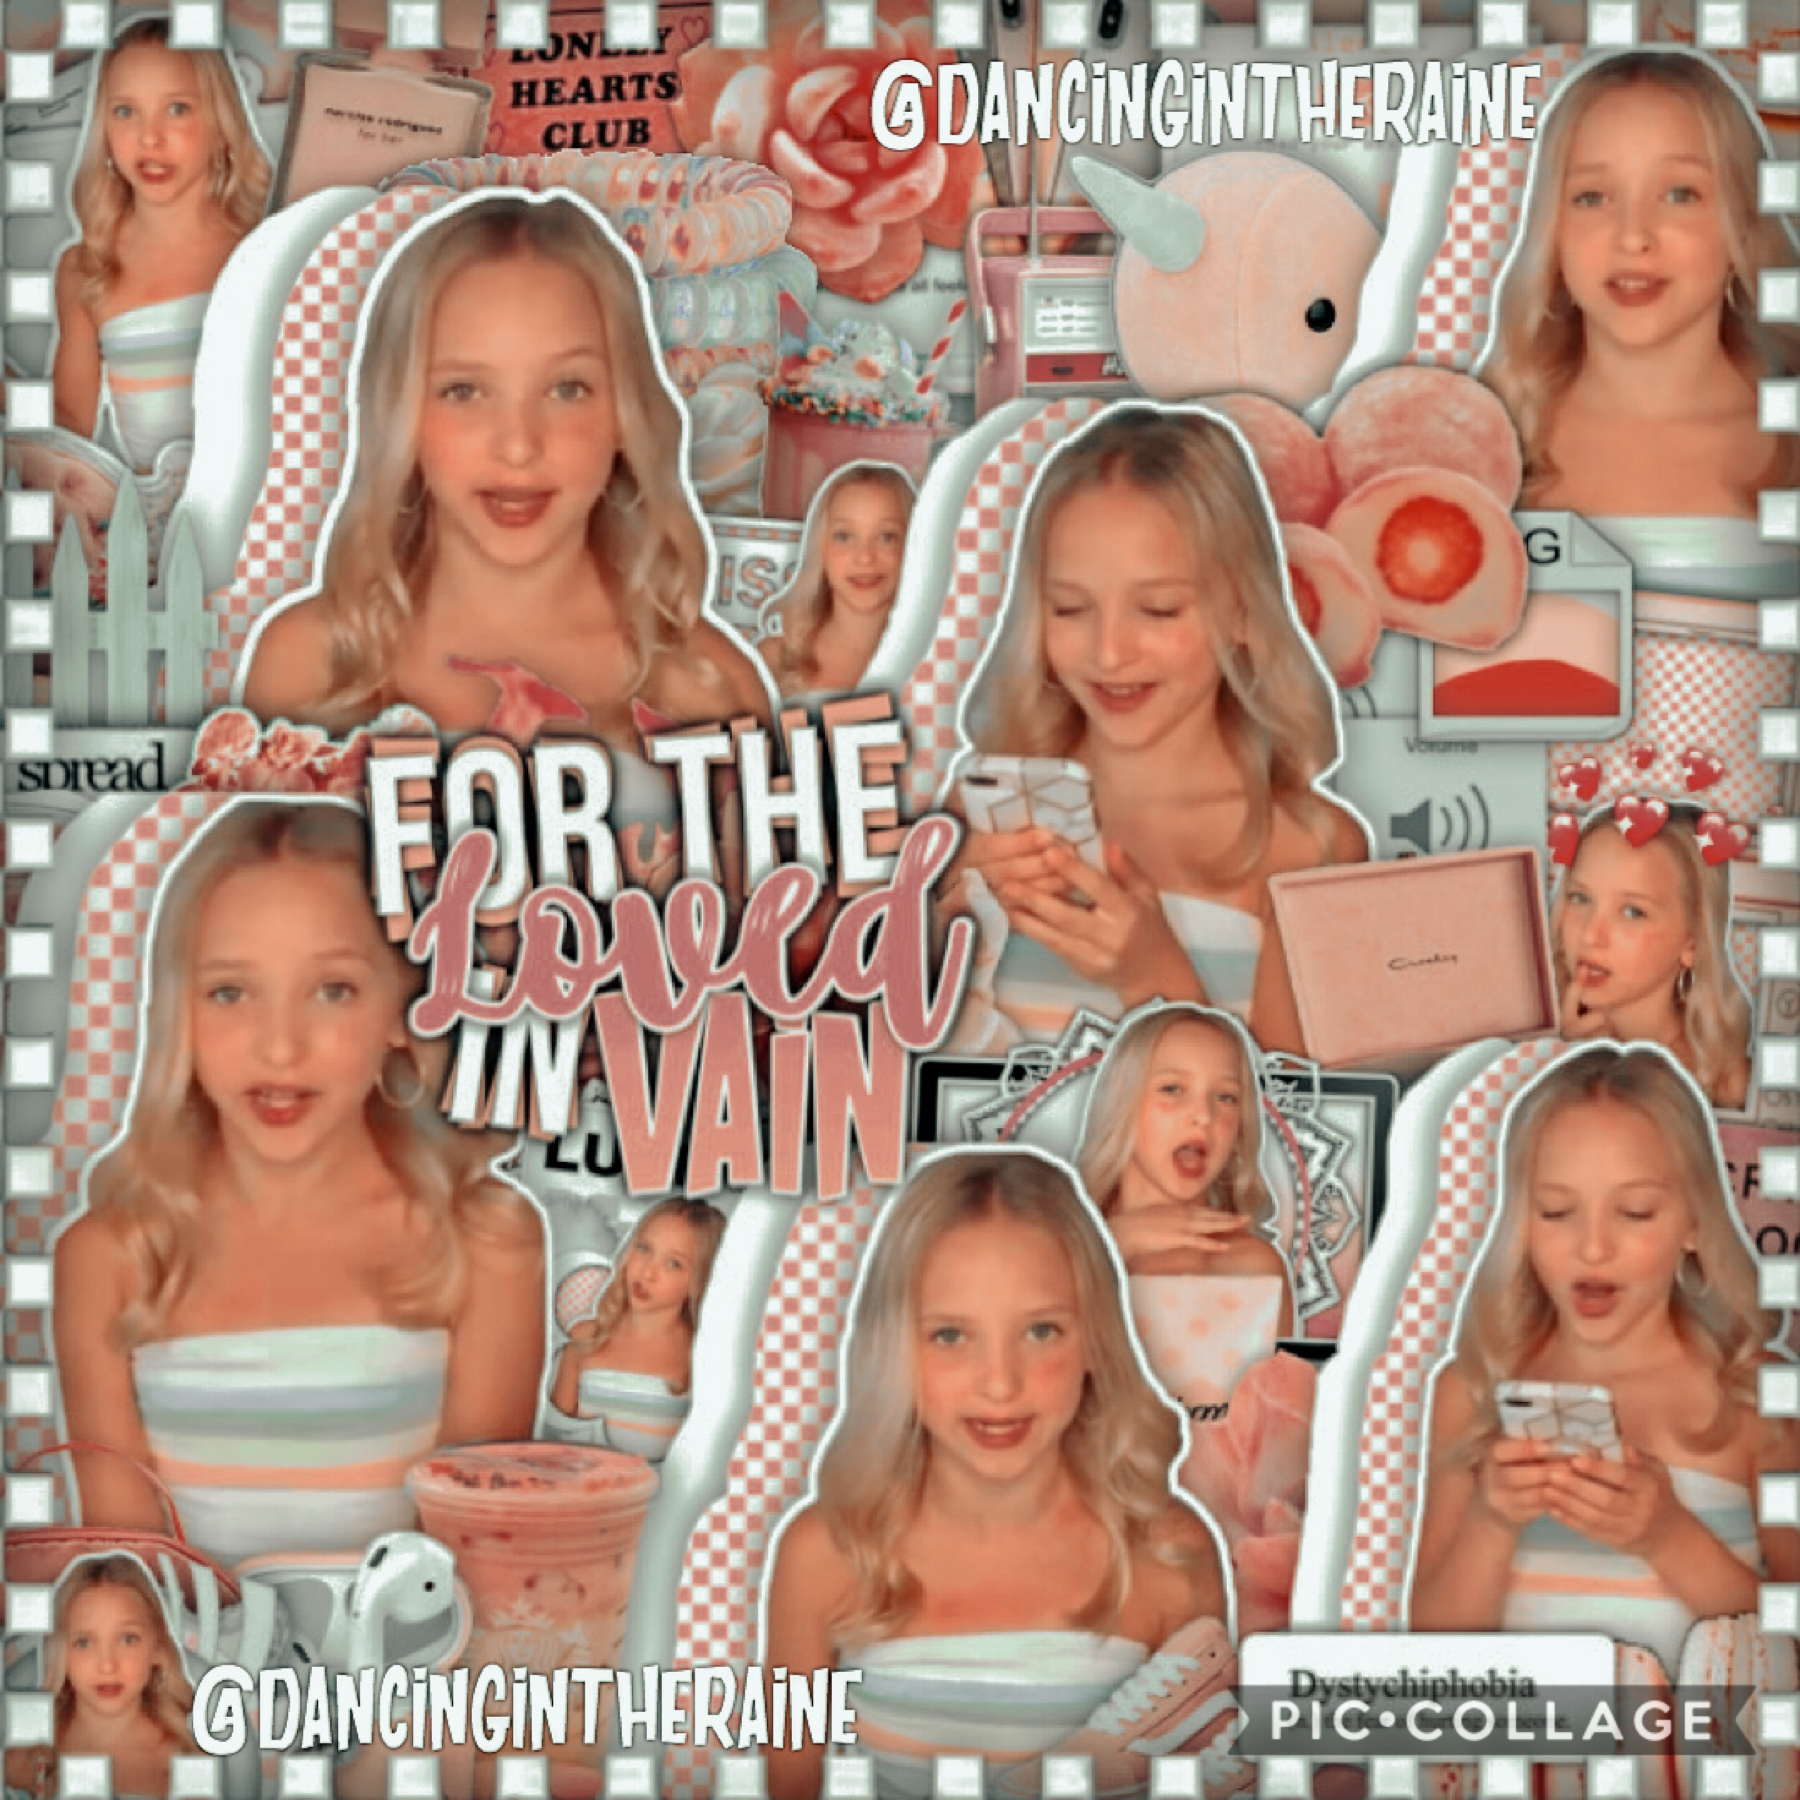 💖💖Lilly Ketchman💖💖

Rate /10?

Would you be interested in me doing a complex, blend, or outline tutorial since I make them on PicsArt? 

If so, which one would you like?